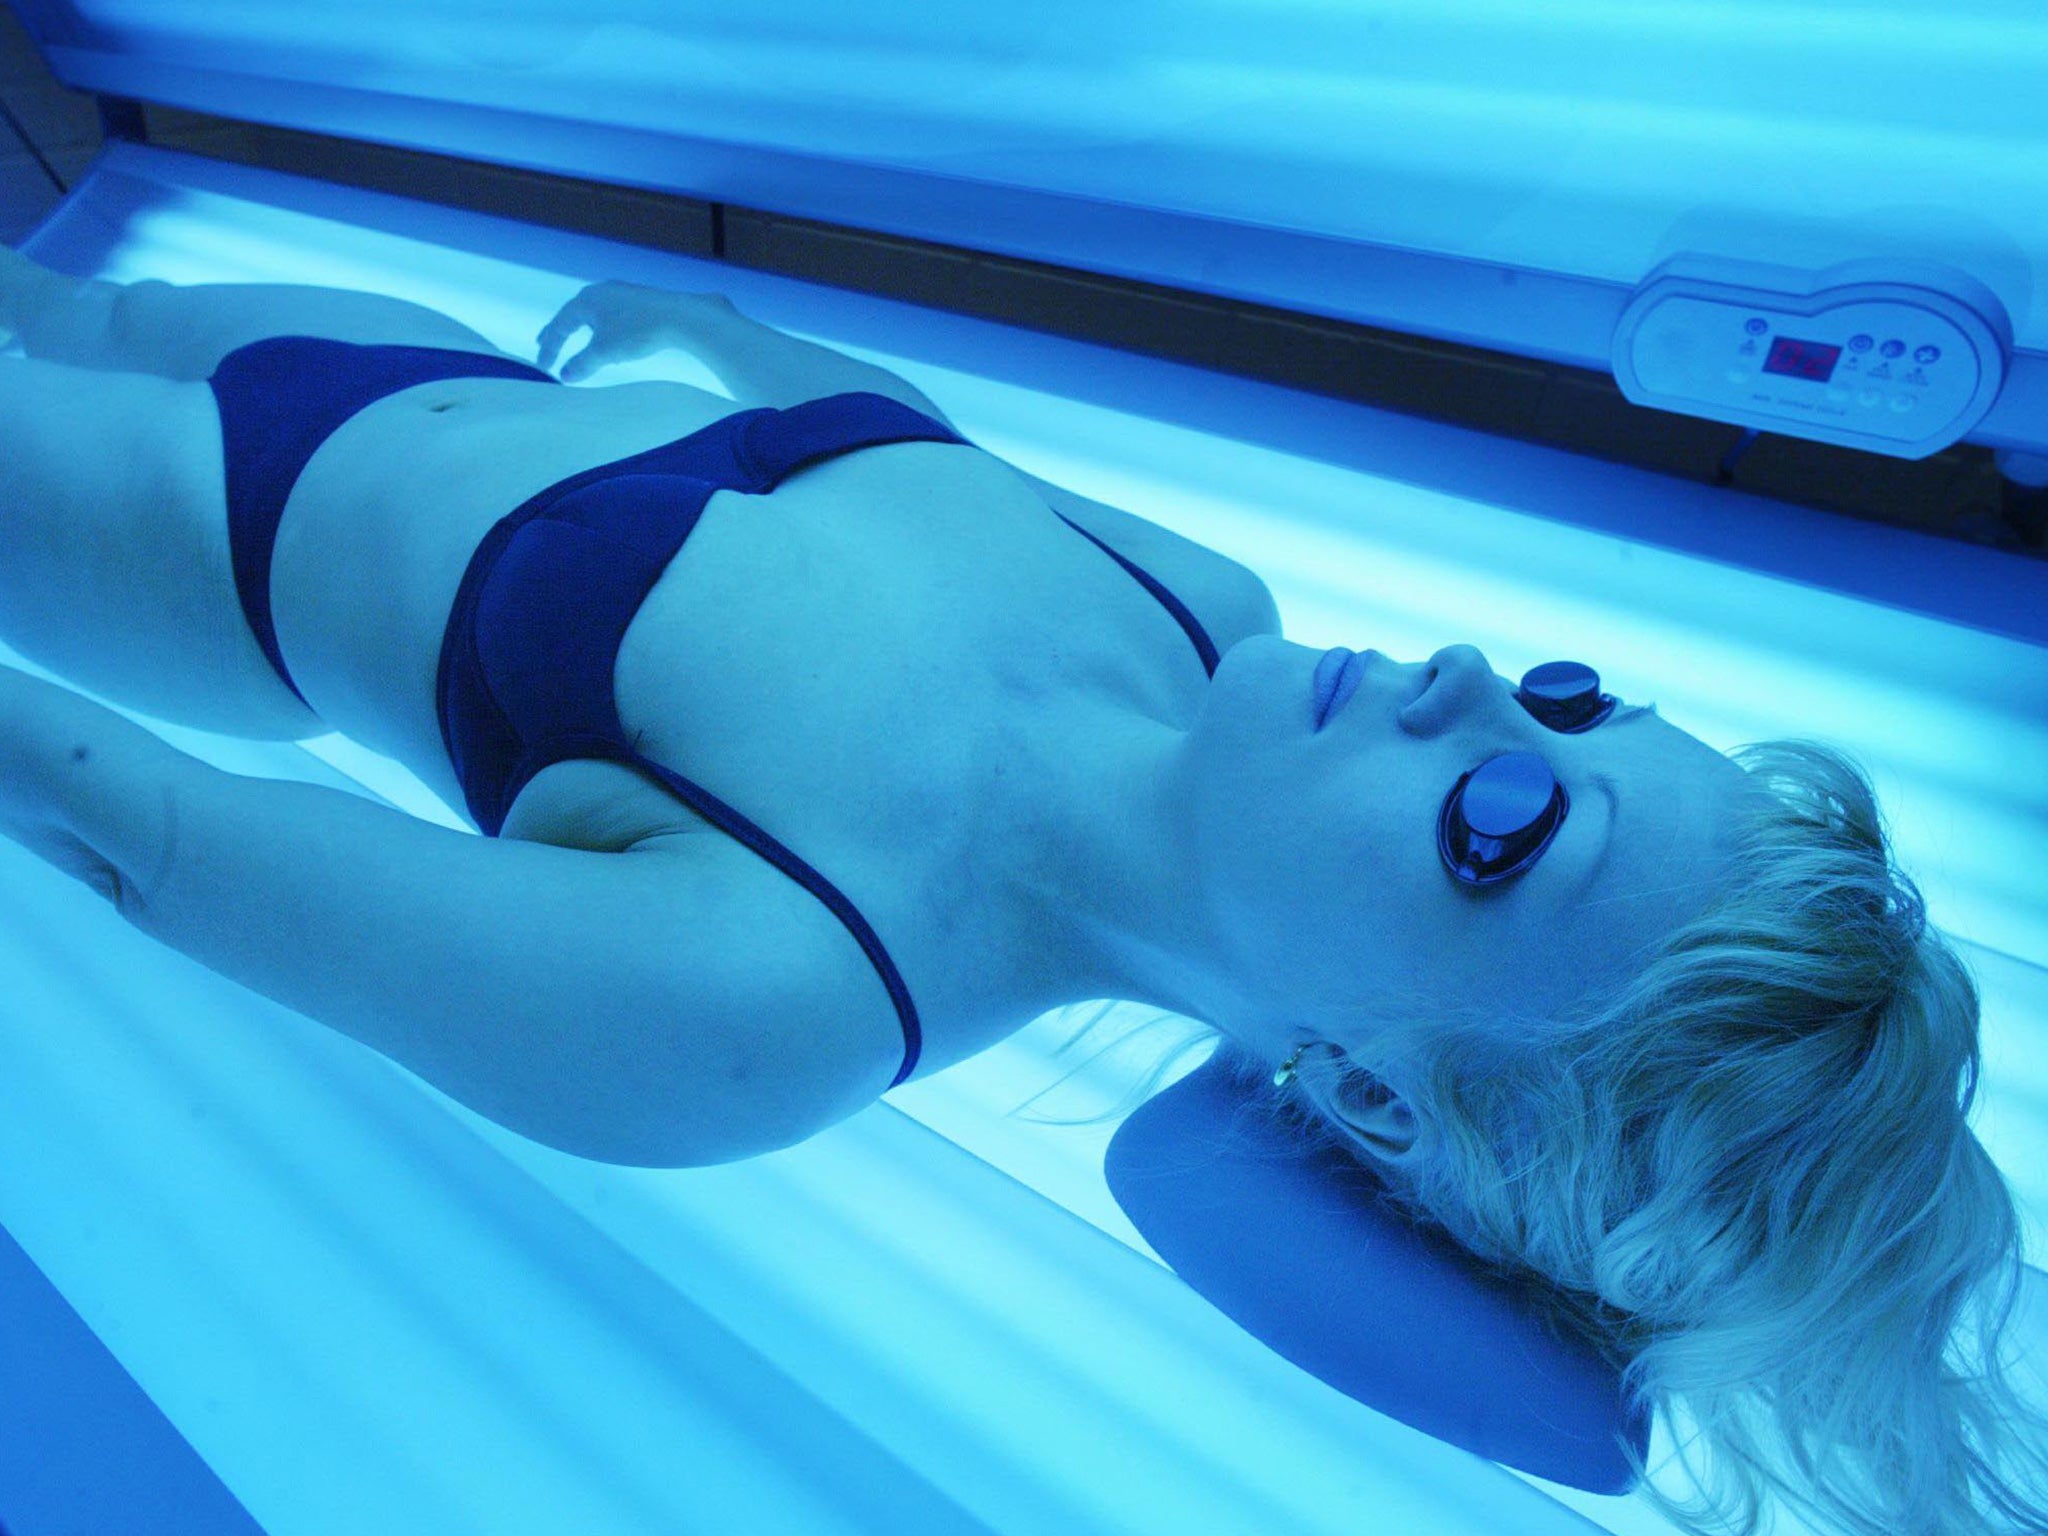 Proposed French legislation would prohibit the selling or giving away of sunbeds to those who are not health and beauty professionals